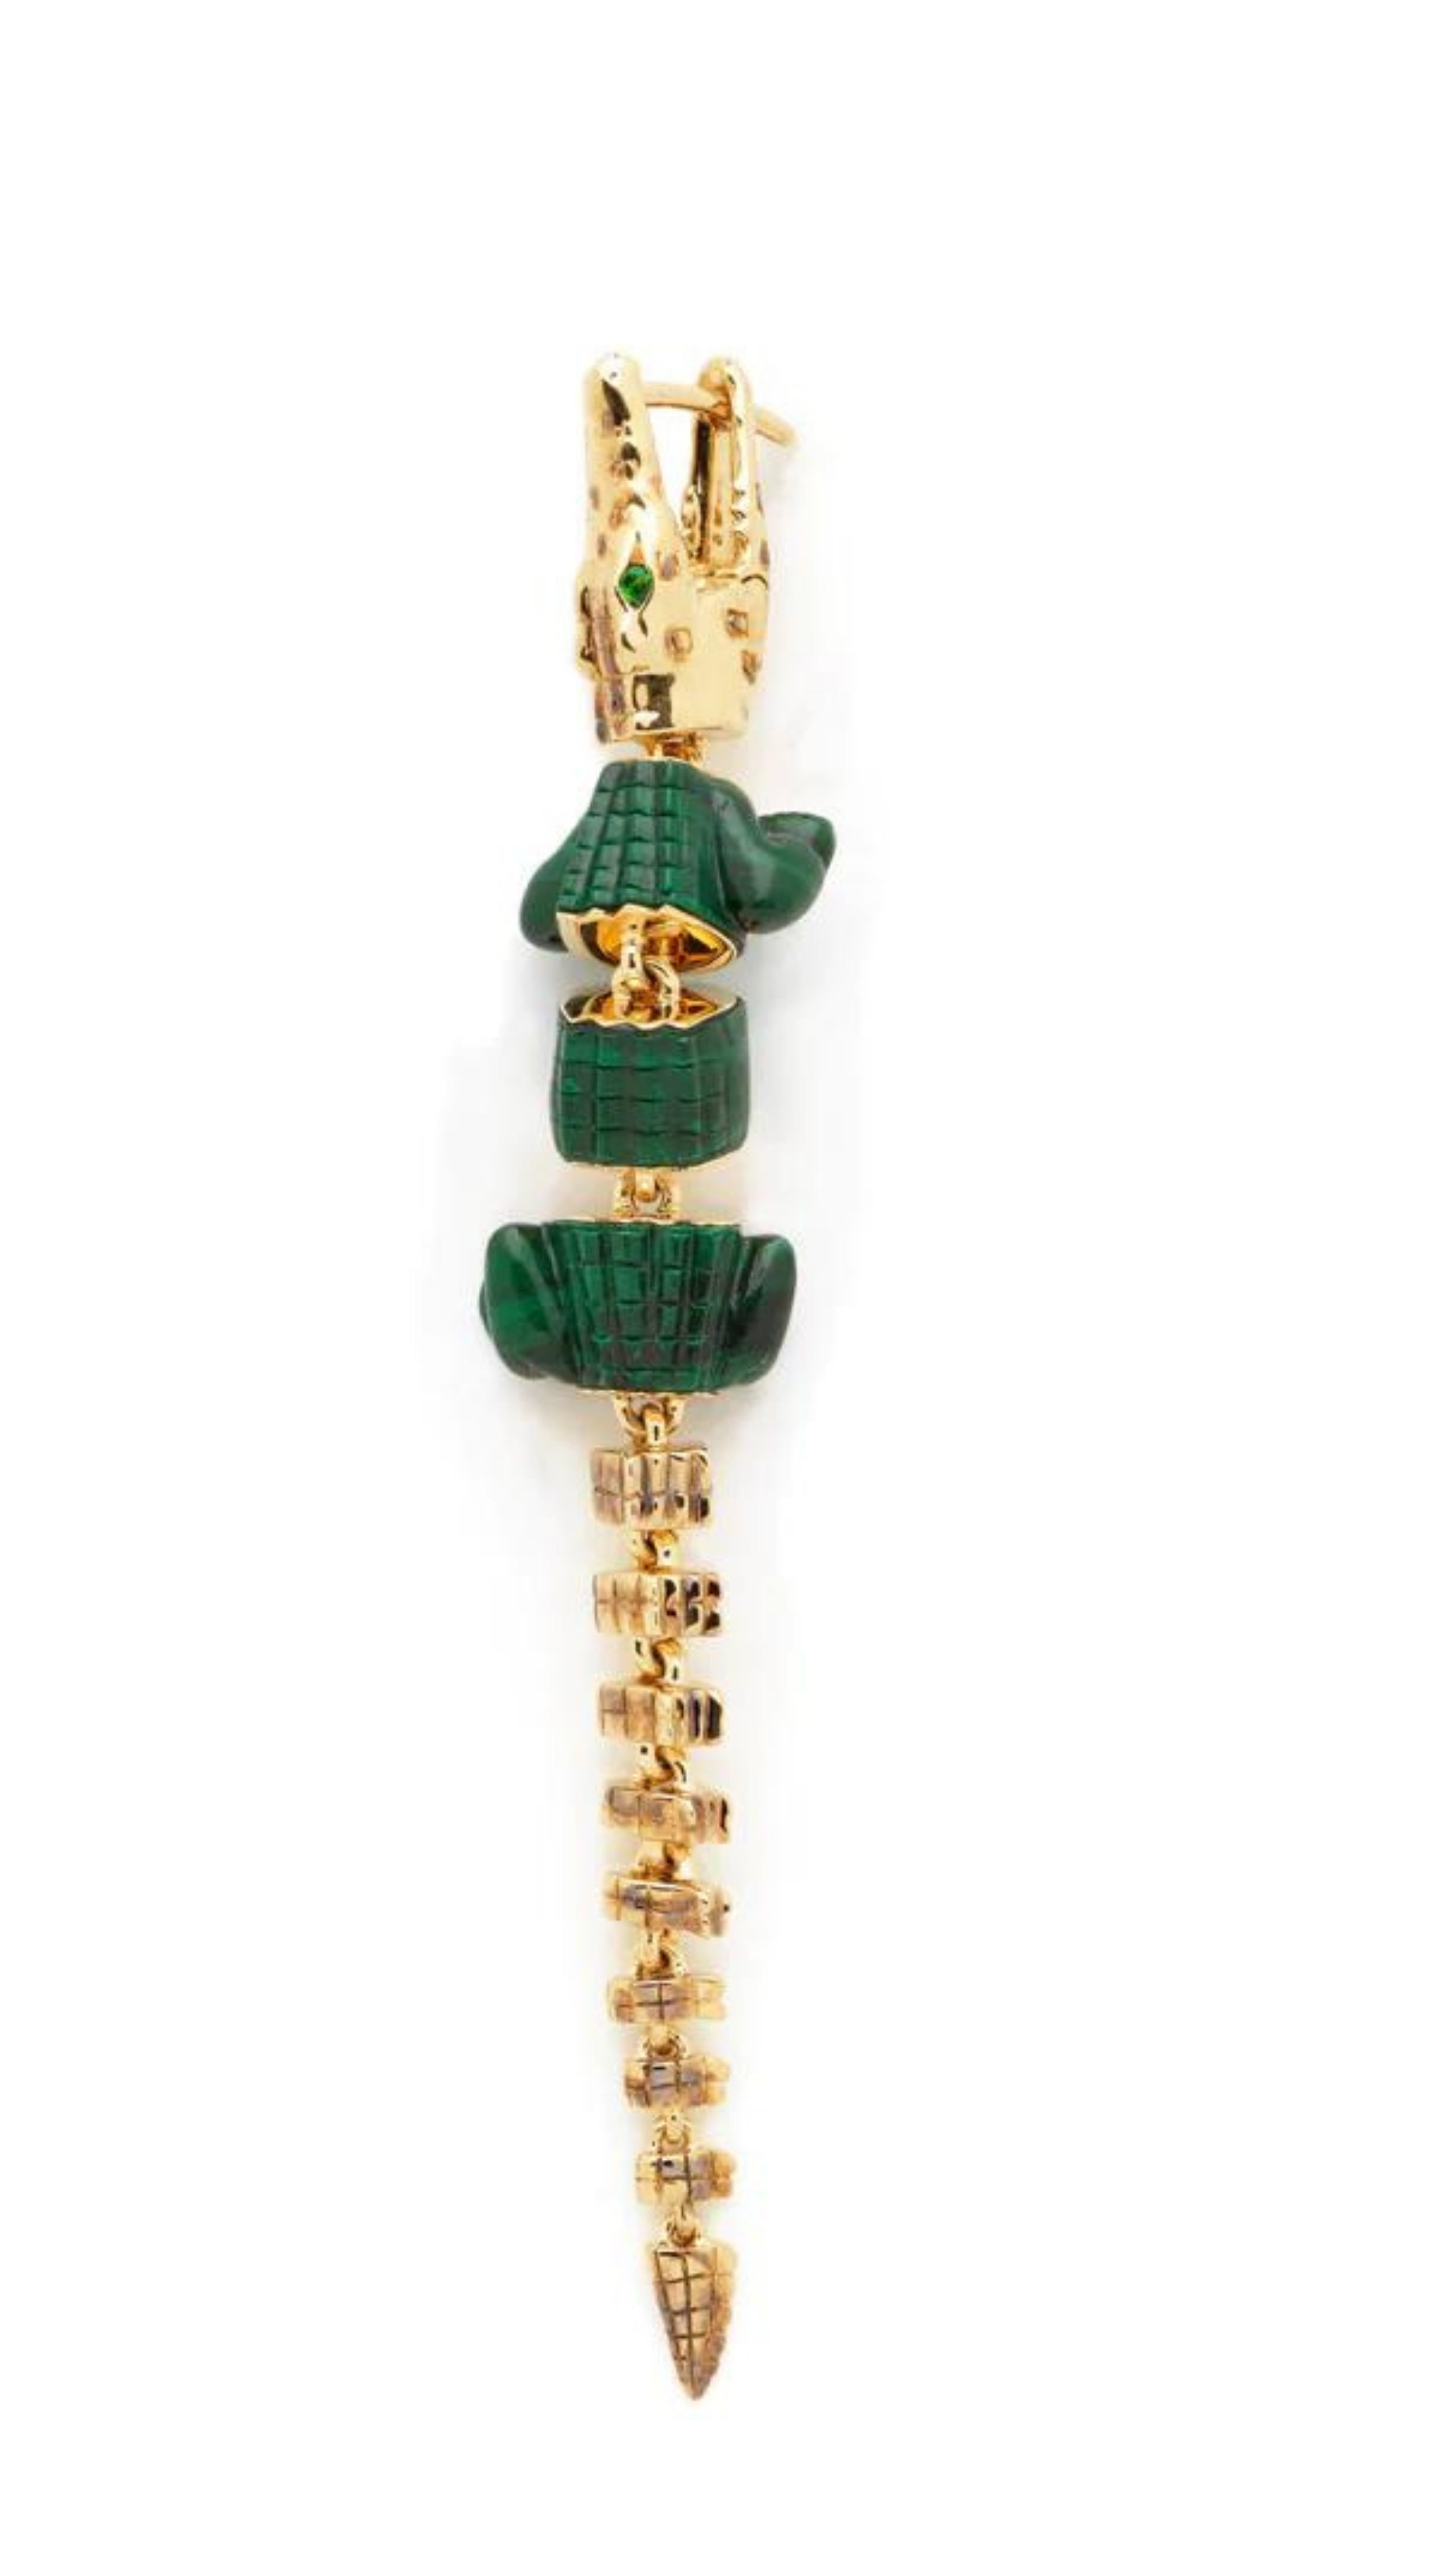 Bibi van der Velden Malachite Alligator Vertebrae Bite Single Earring. Hand-crafted 18K yellow gold earring with spine of the alligator and lifelike malachite body with Tsavorite accents. It has a unique bite clasp and moving tail. Shown from the front side.